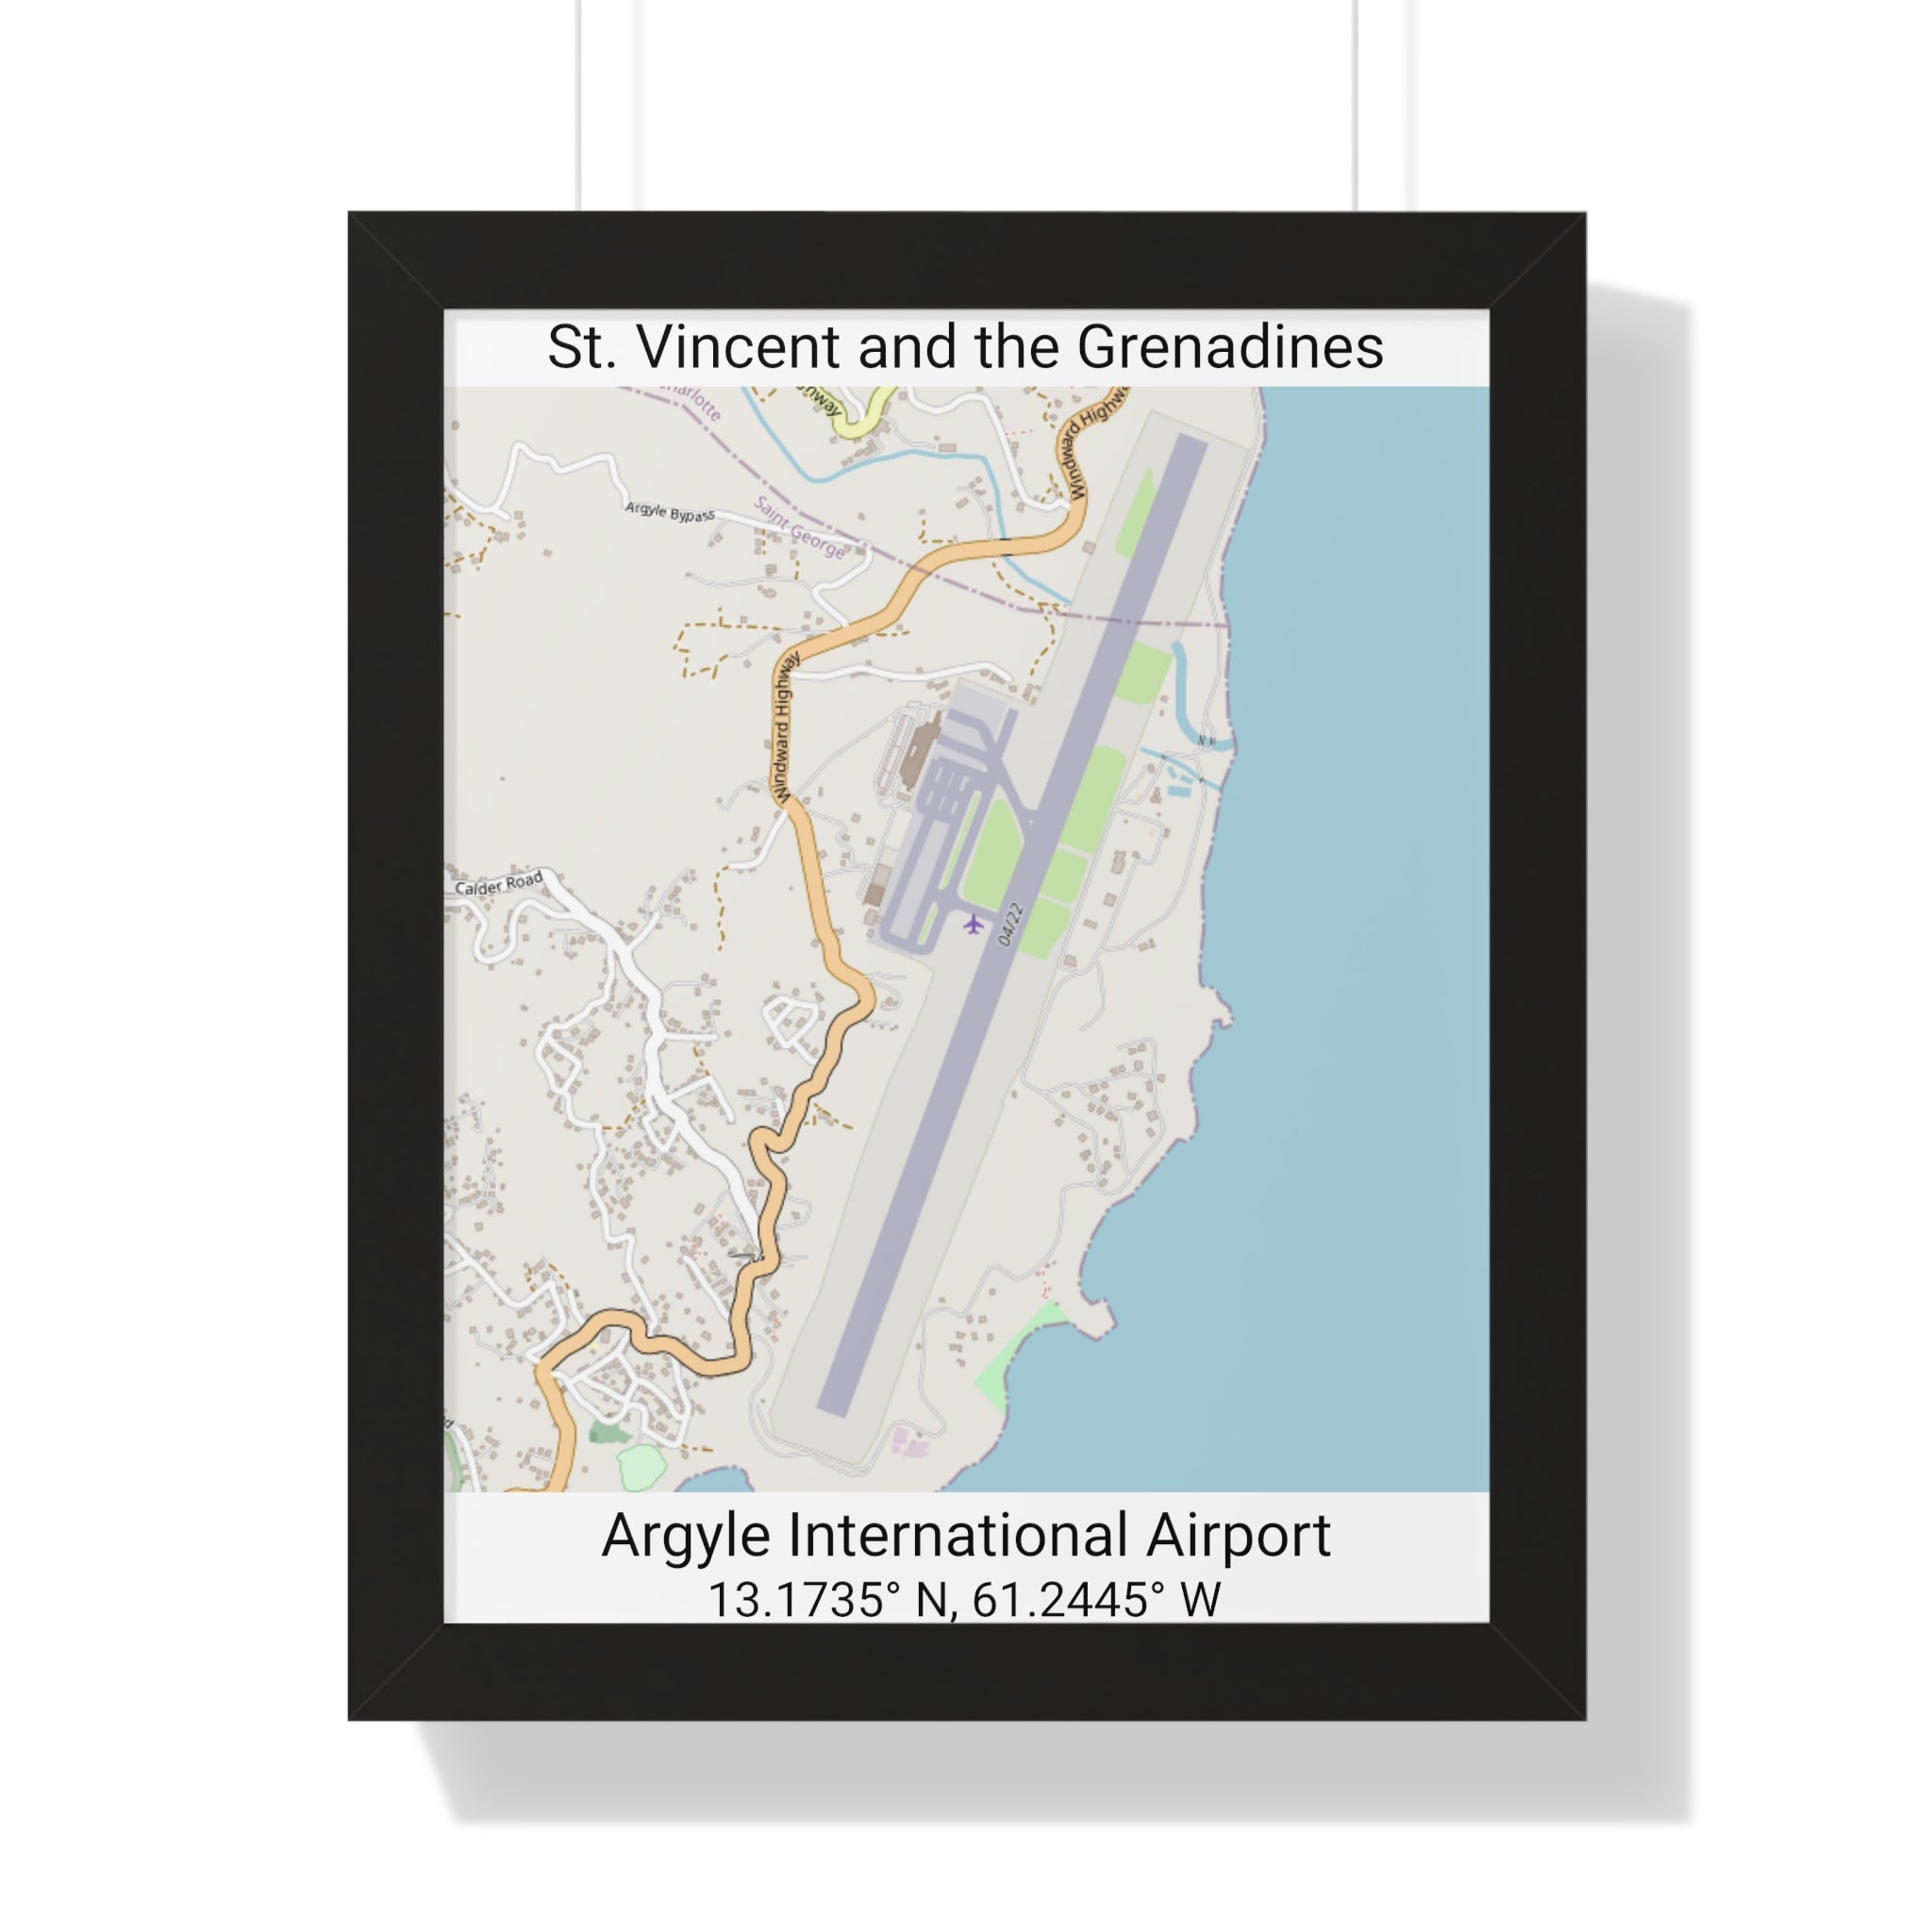 St. Vincent and the Grenadines Argyle International Airport Map Framed Print Poster, City Map Print Poster. Airport Map Print Poster, Road Map Print Poster, Framed Vertical Poster